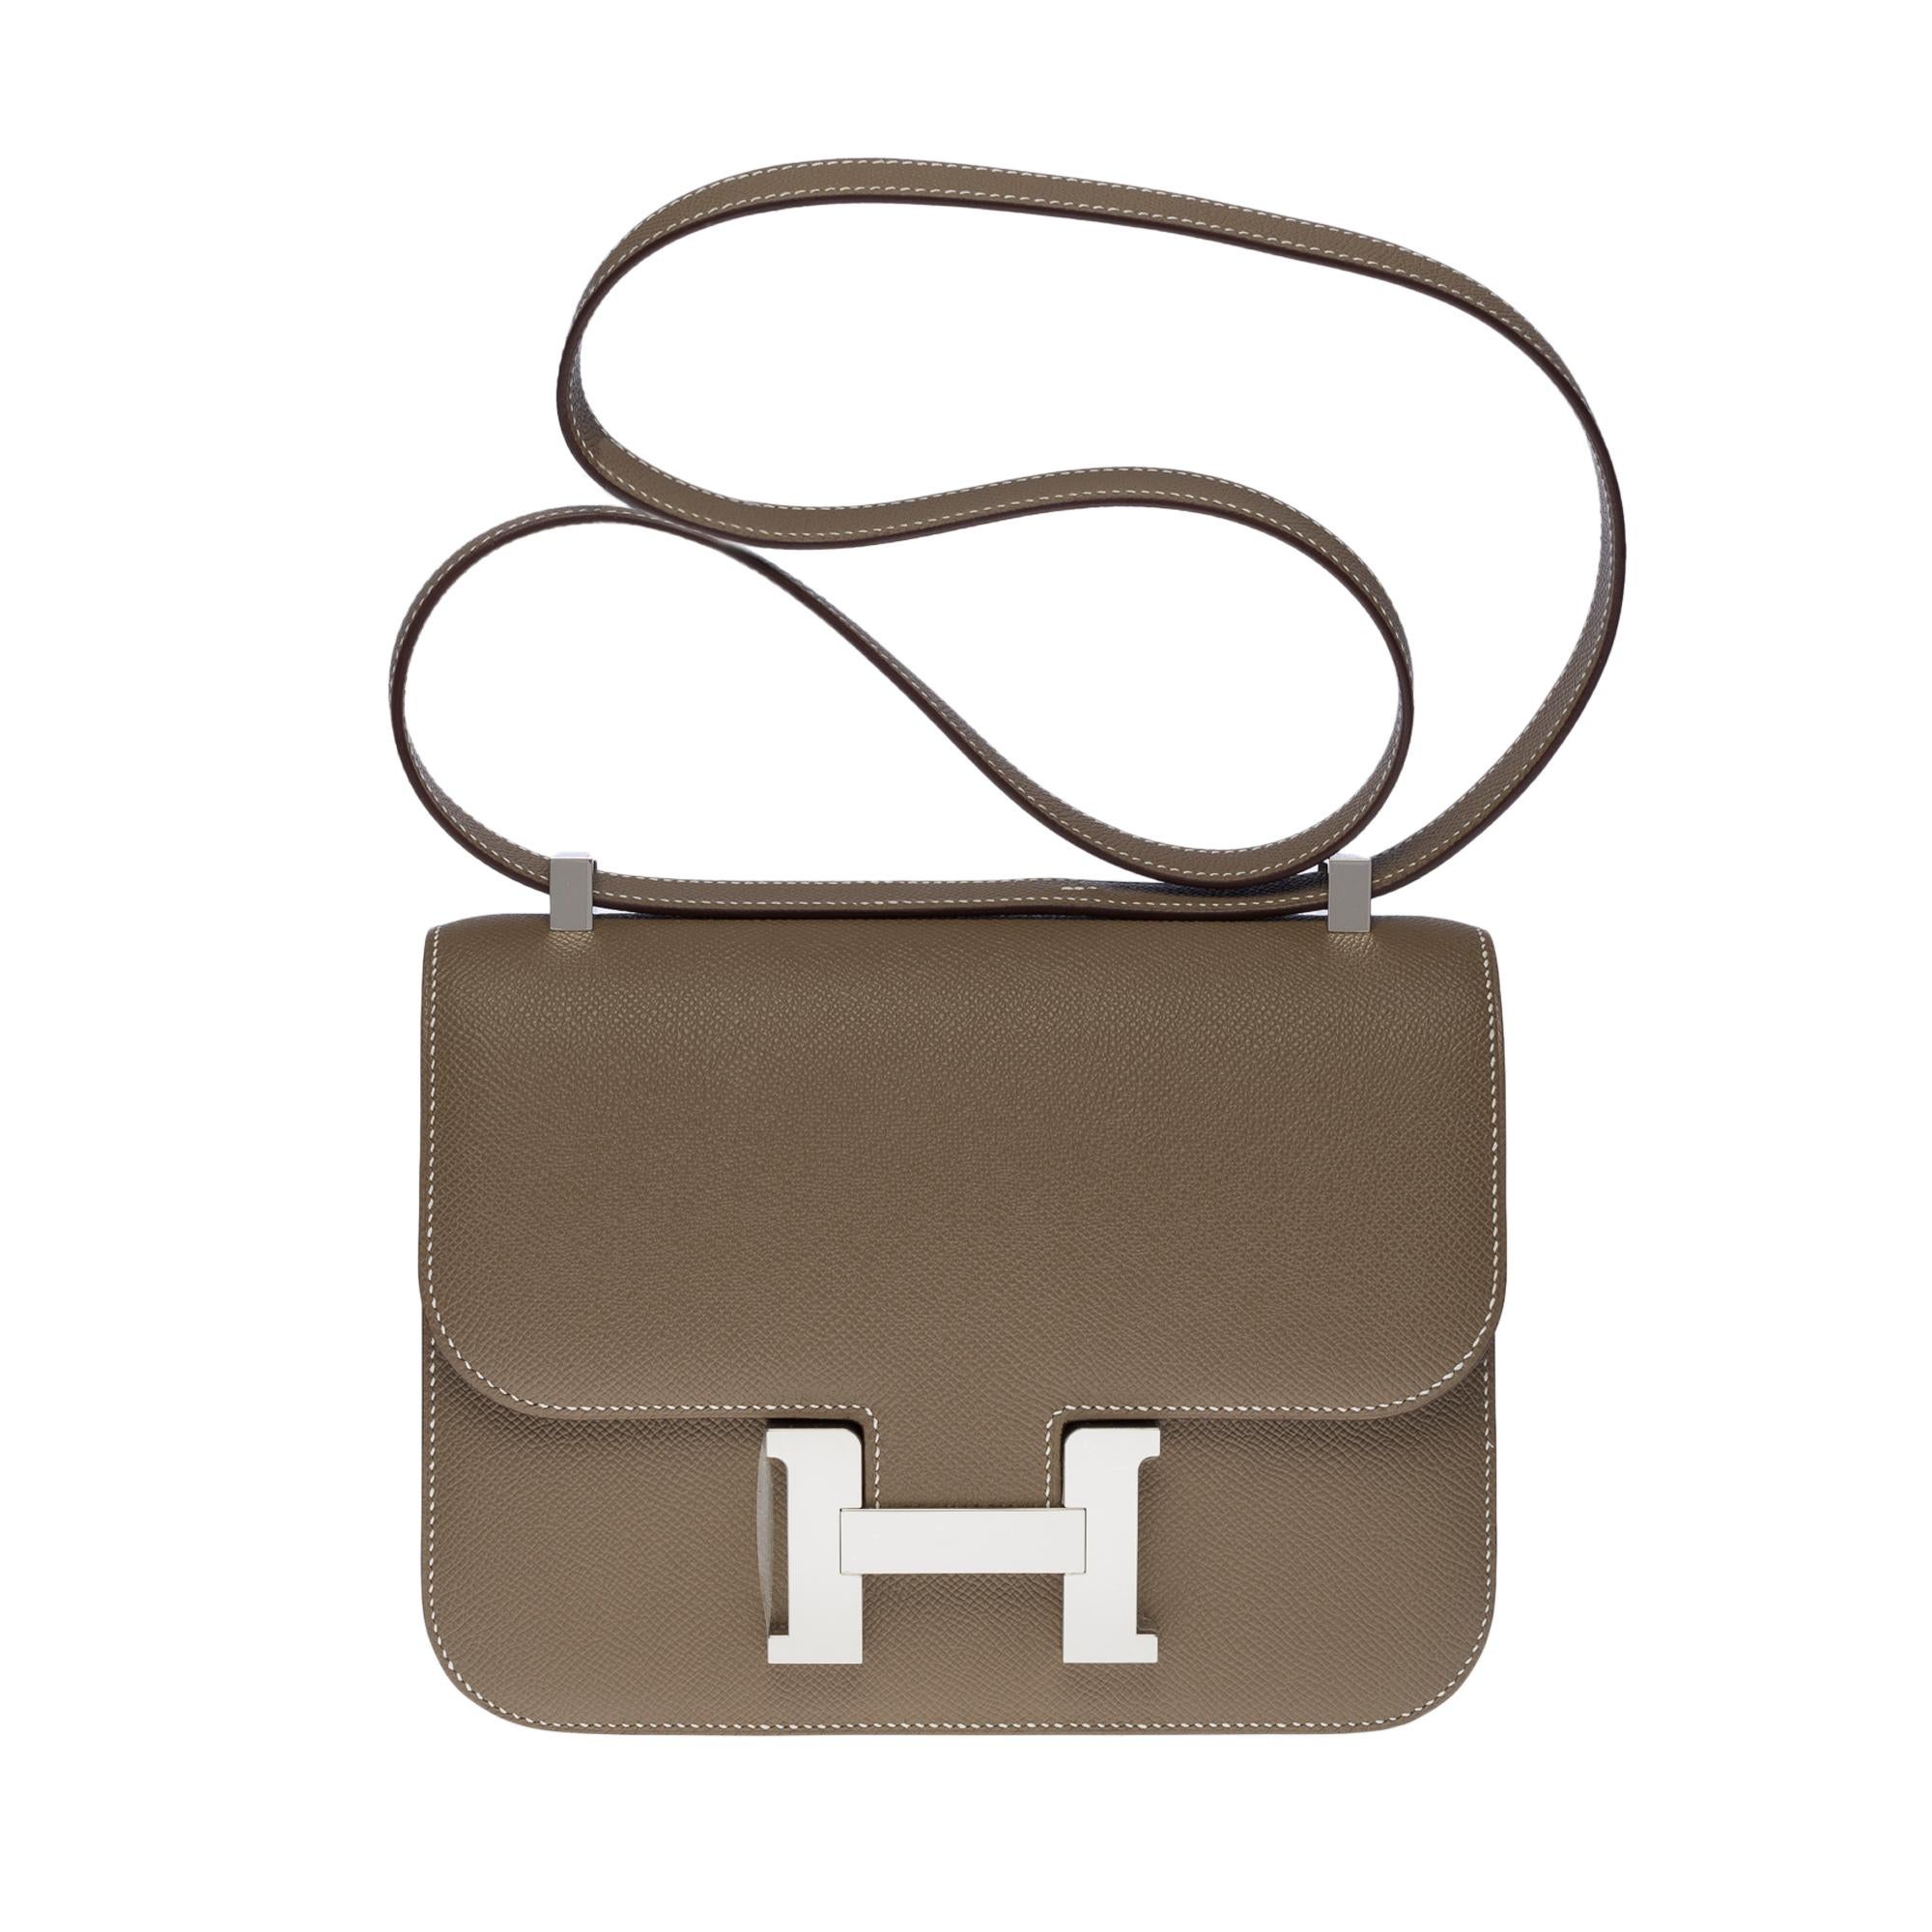 Brand New - Fresh Store

Magnificent Hermès Constance 24 shoulder bag in etoupe epsom calf leather with white stitching, palladium silver metal hardware, a removable courtesy mirror, a shoulder strap in grey leather allowing a shoulder or shoulder